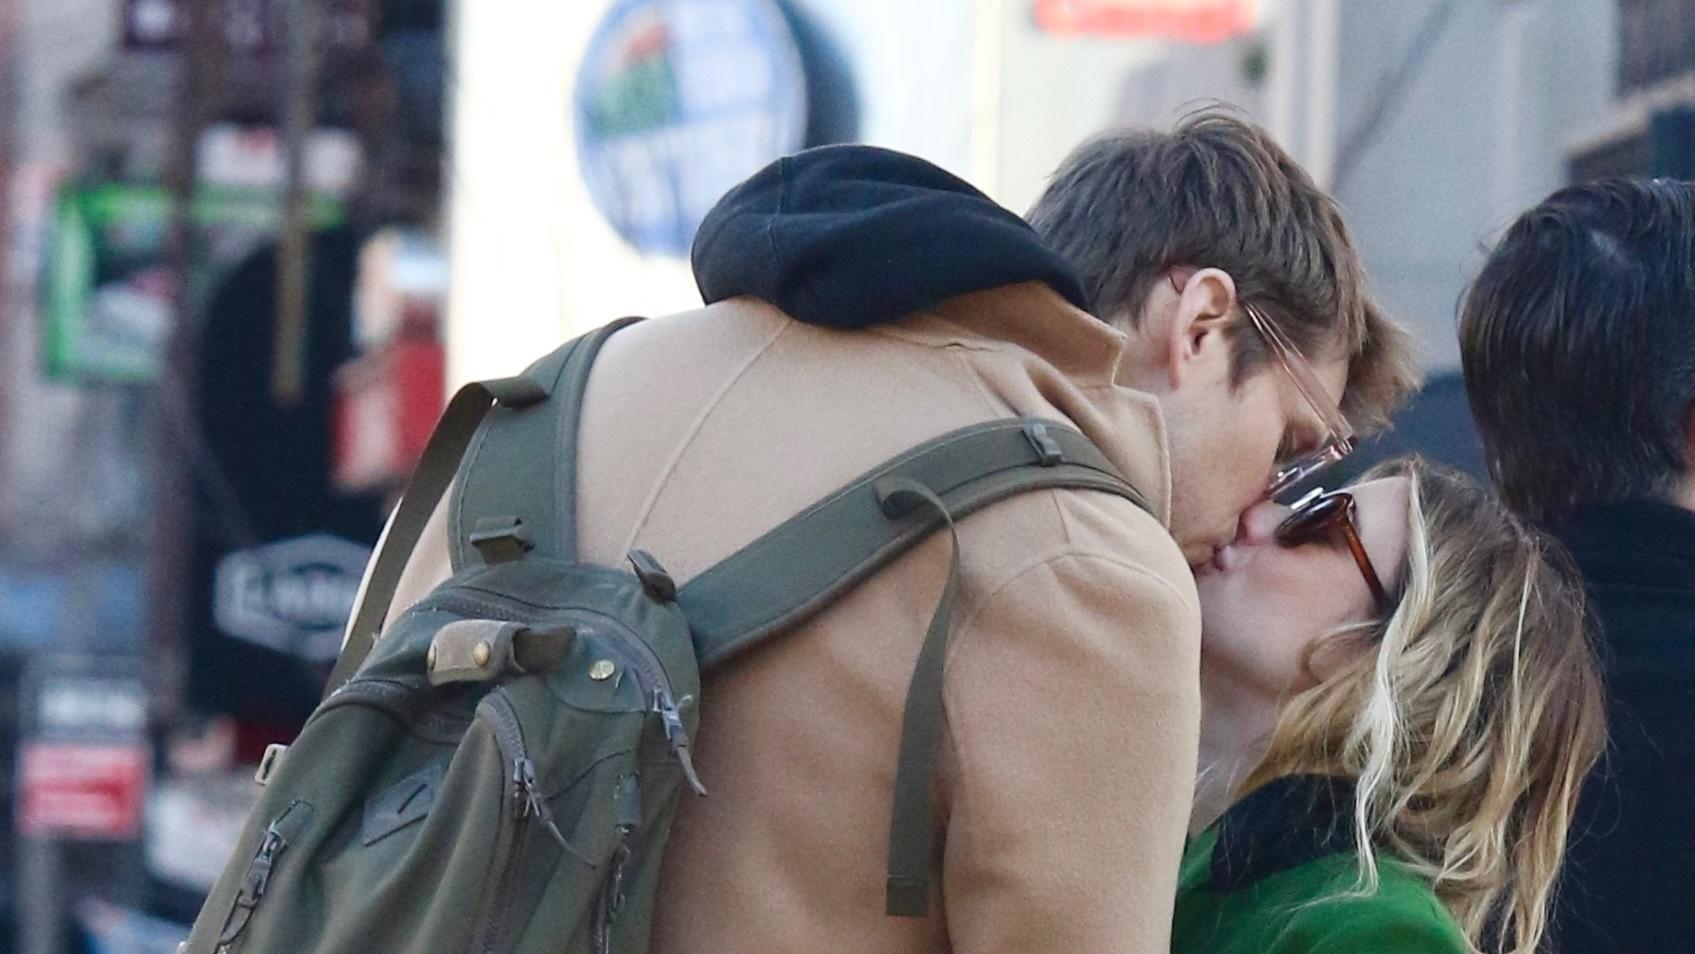 SONDERKONDITIONEN: MINDESTHONORAR: New York, NY - *EXCLUSIVE* - Actress Emma Roberts and her boyfriend Cody John are all smiles as they hold hands and kiss during a romantic PDA-filled moment in Manhattan’s Downtown area.Pictured: Emma Roberts, Cody 